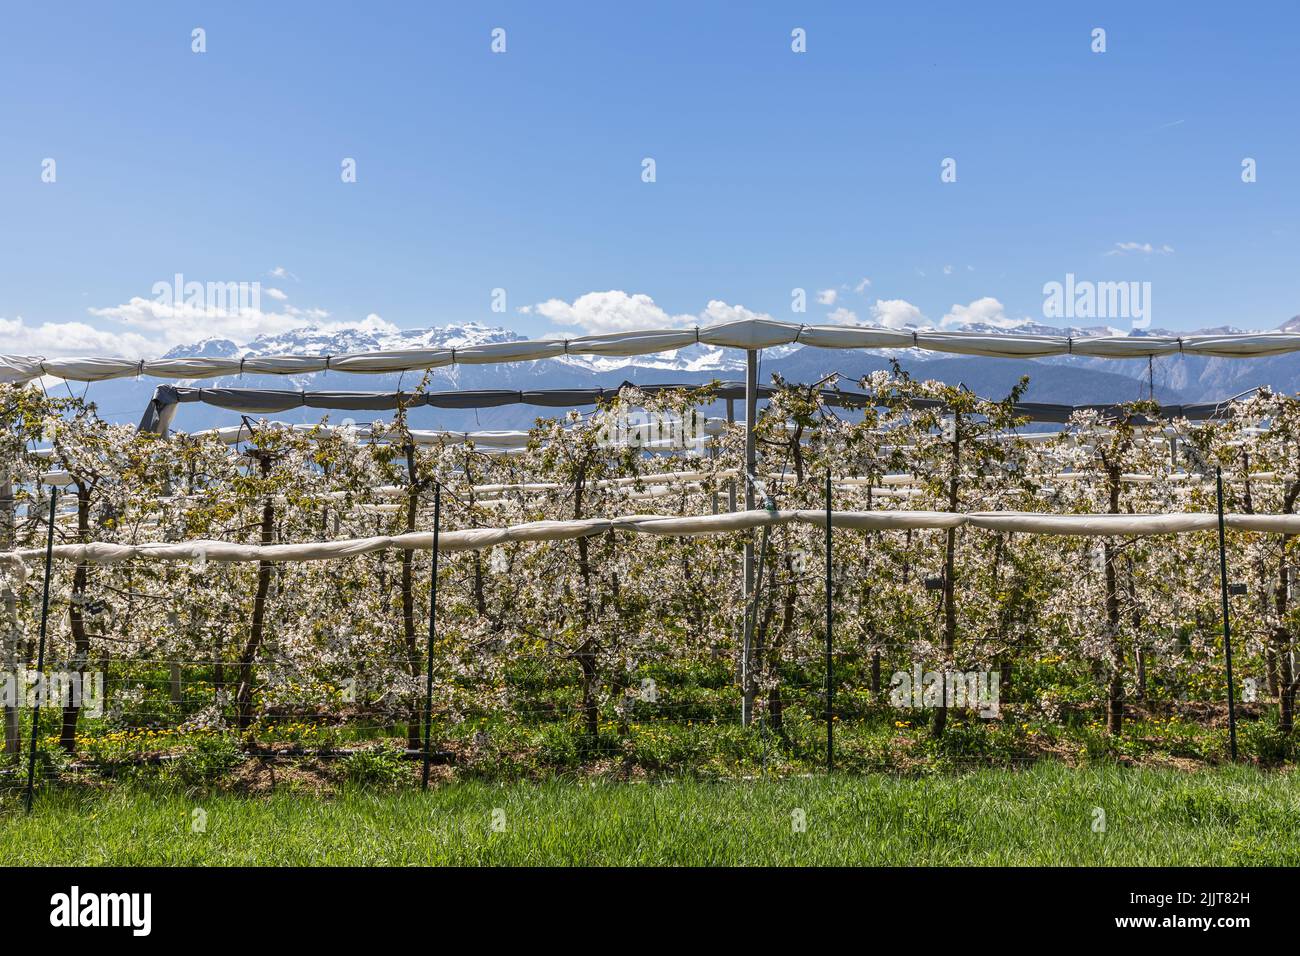 Plantation of young flowering apple trees open from under a canopy against the backdrop of the snowy Alpine peaks, Val di Non, Trentino, Italy Stock Photo